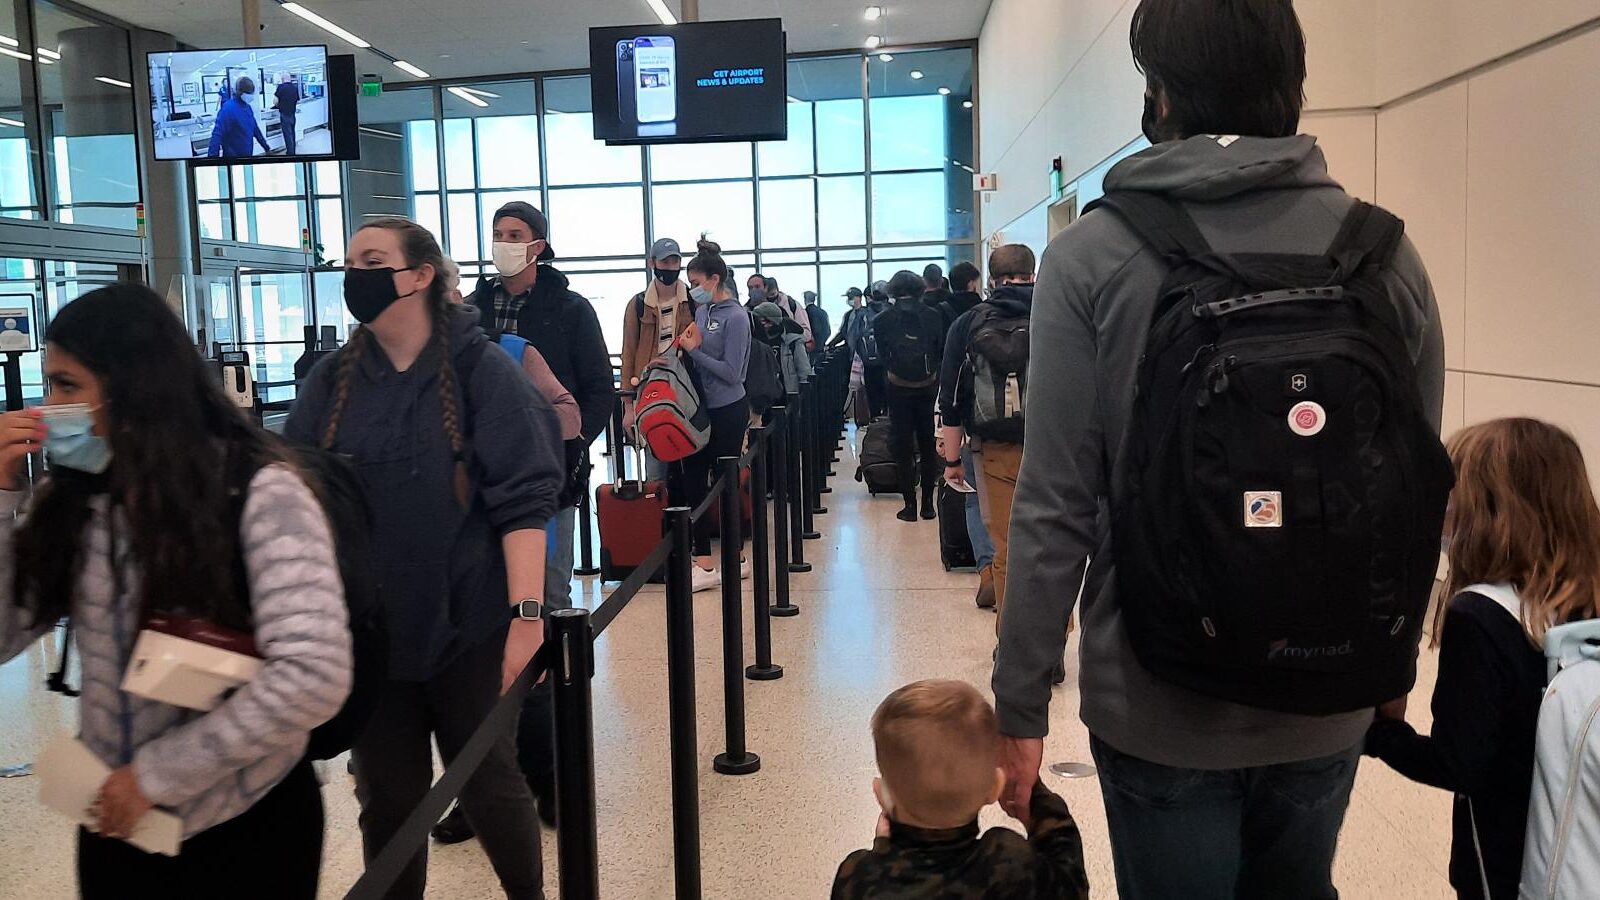 salt lake city international airport security line, airport experiencing delays due to weather toda...